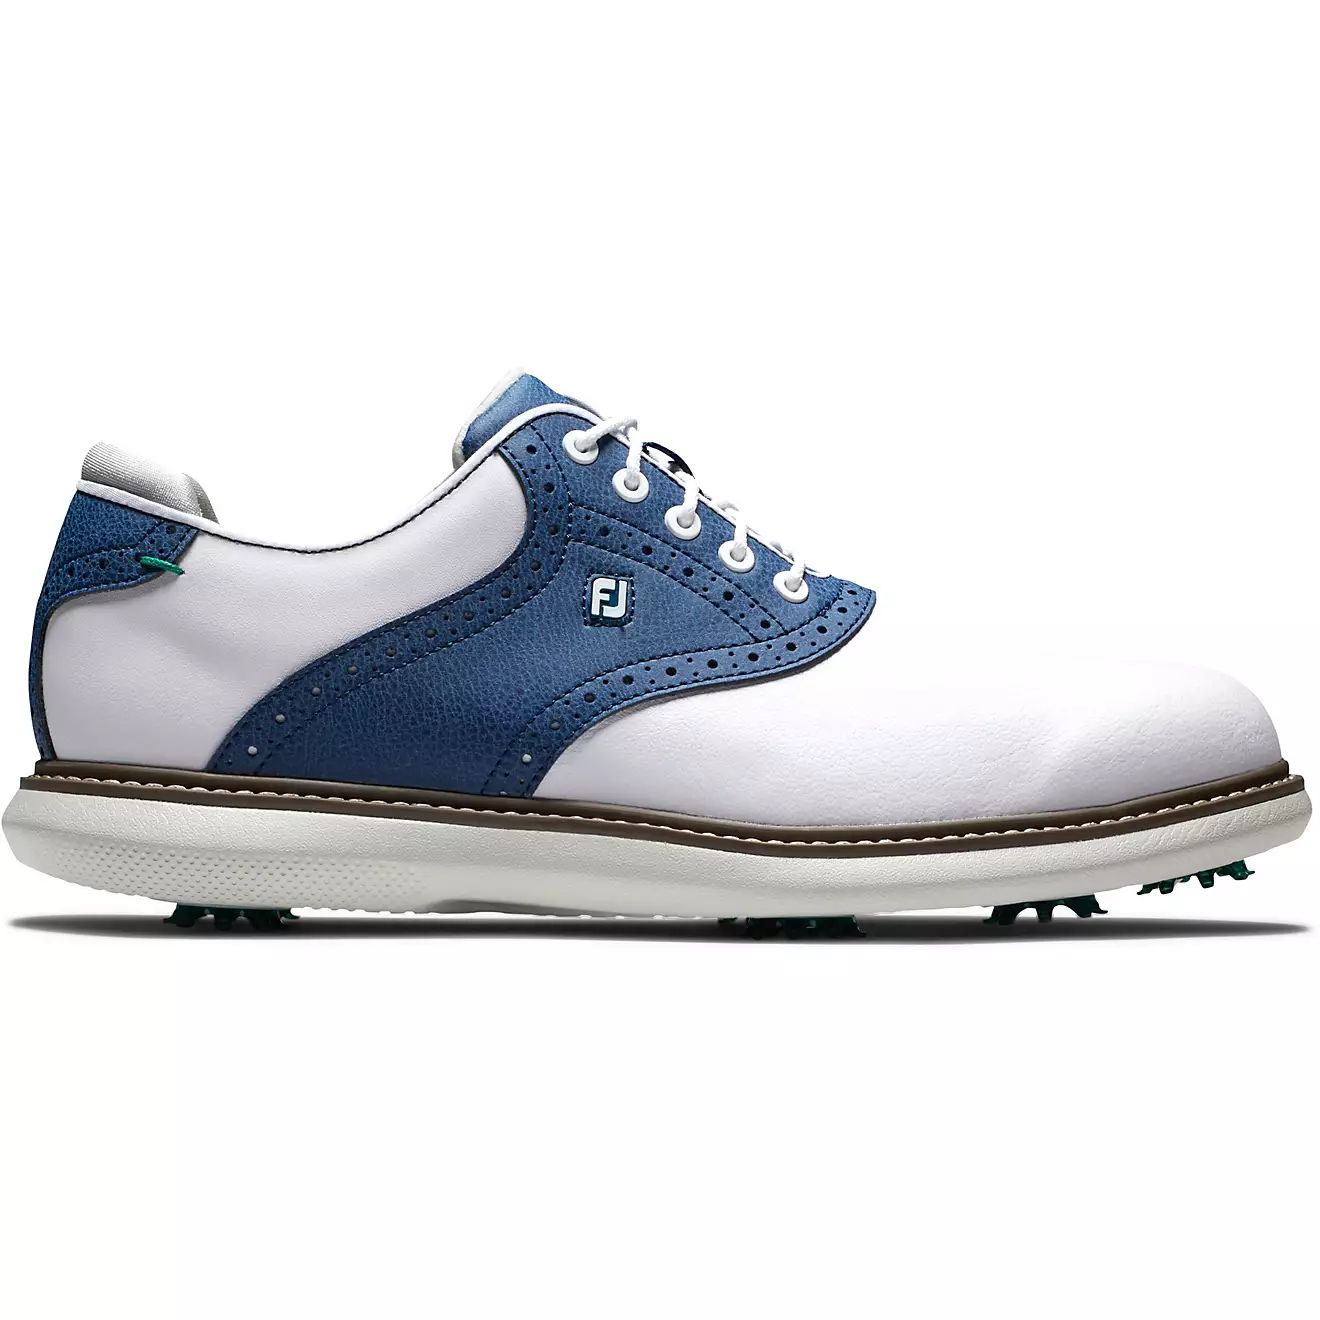 FootJoy Men's Traditions Spiked Golf Shoes | Academy Sports + Outdoors